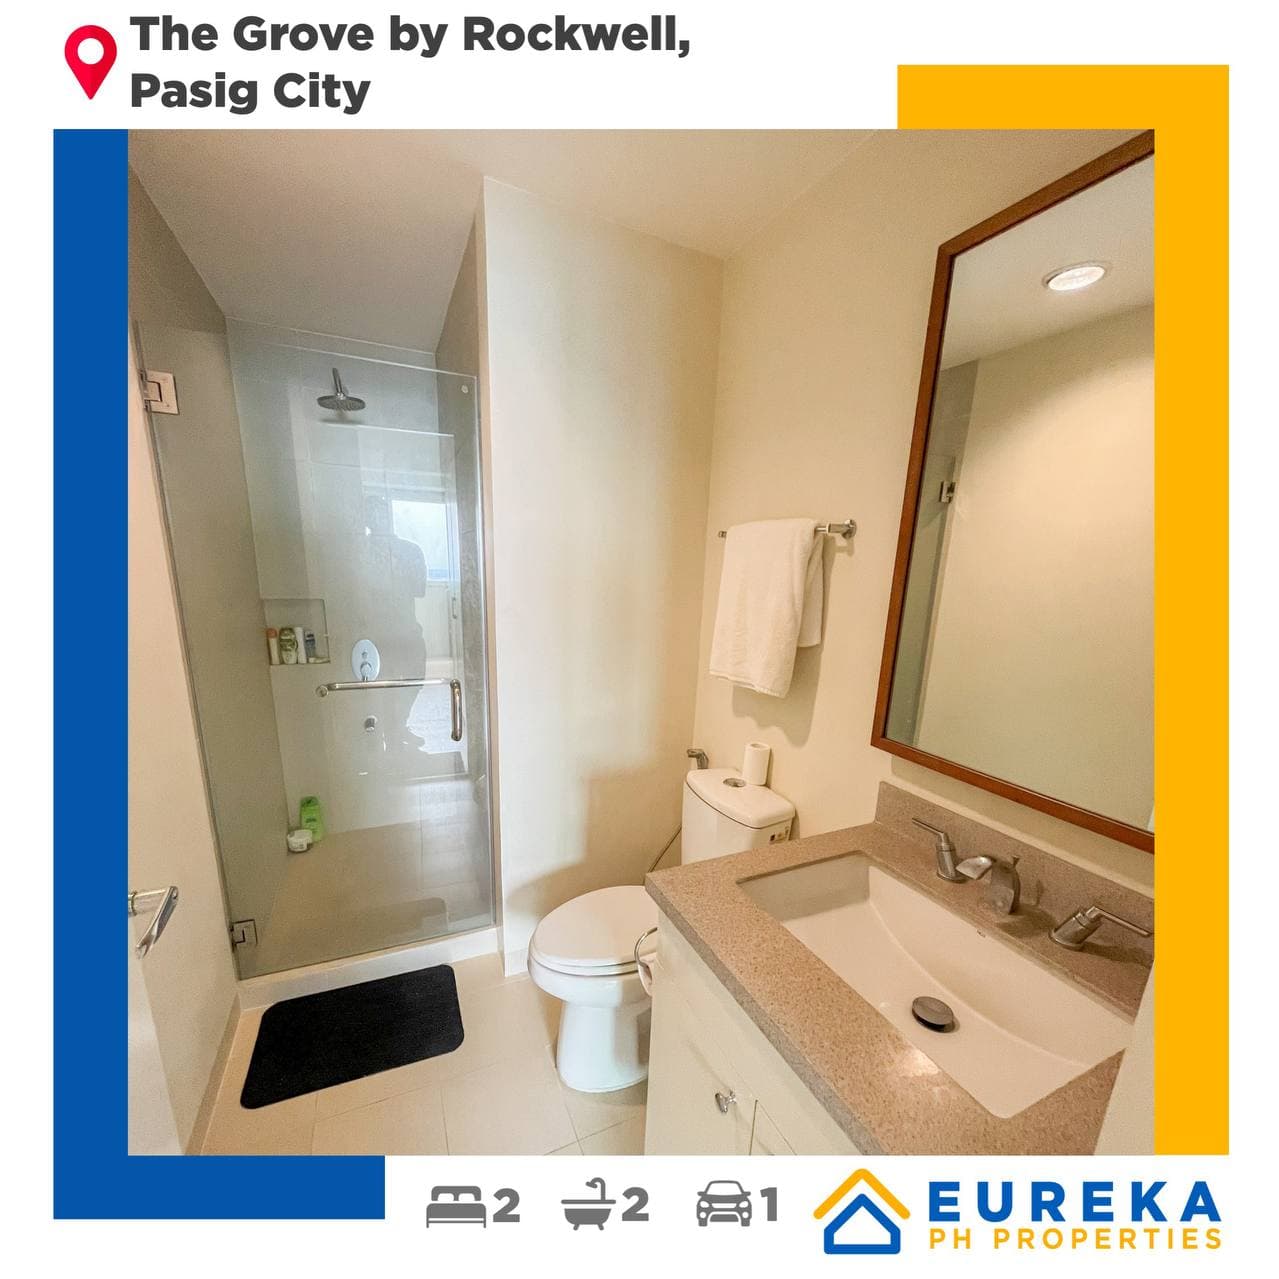 Fully furnished 2BR  106sqm w/ 2 parking  slots at the Grove by Rockwell, Pasig City.